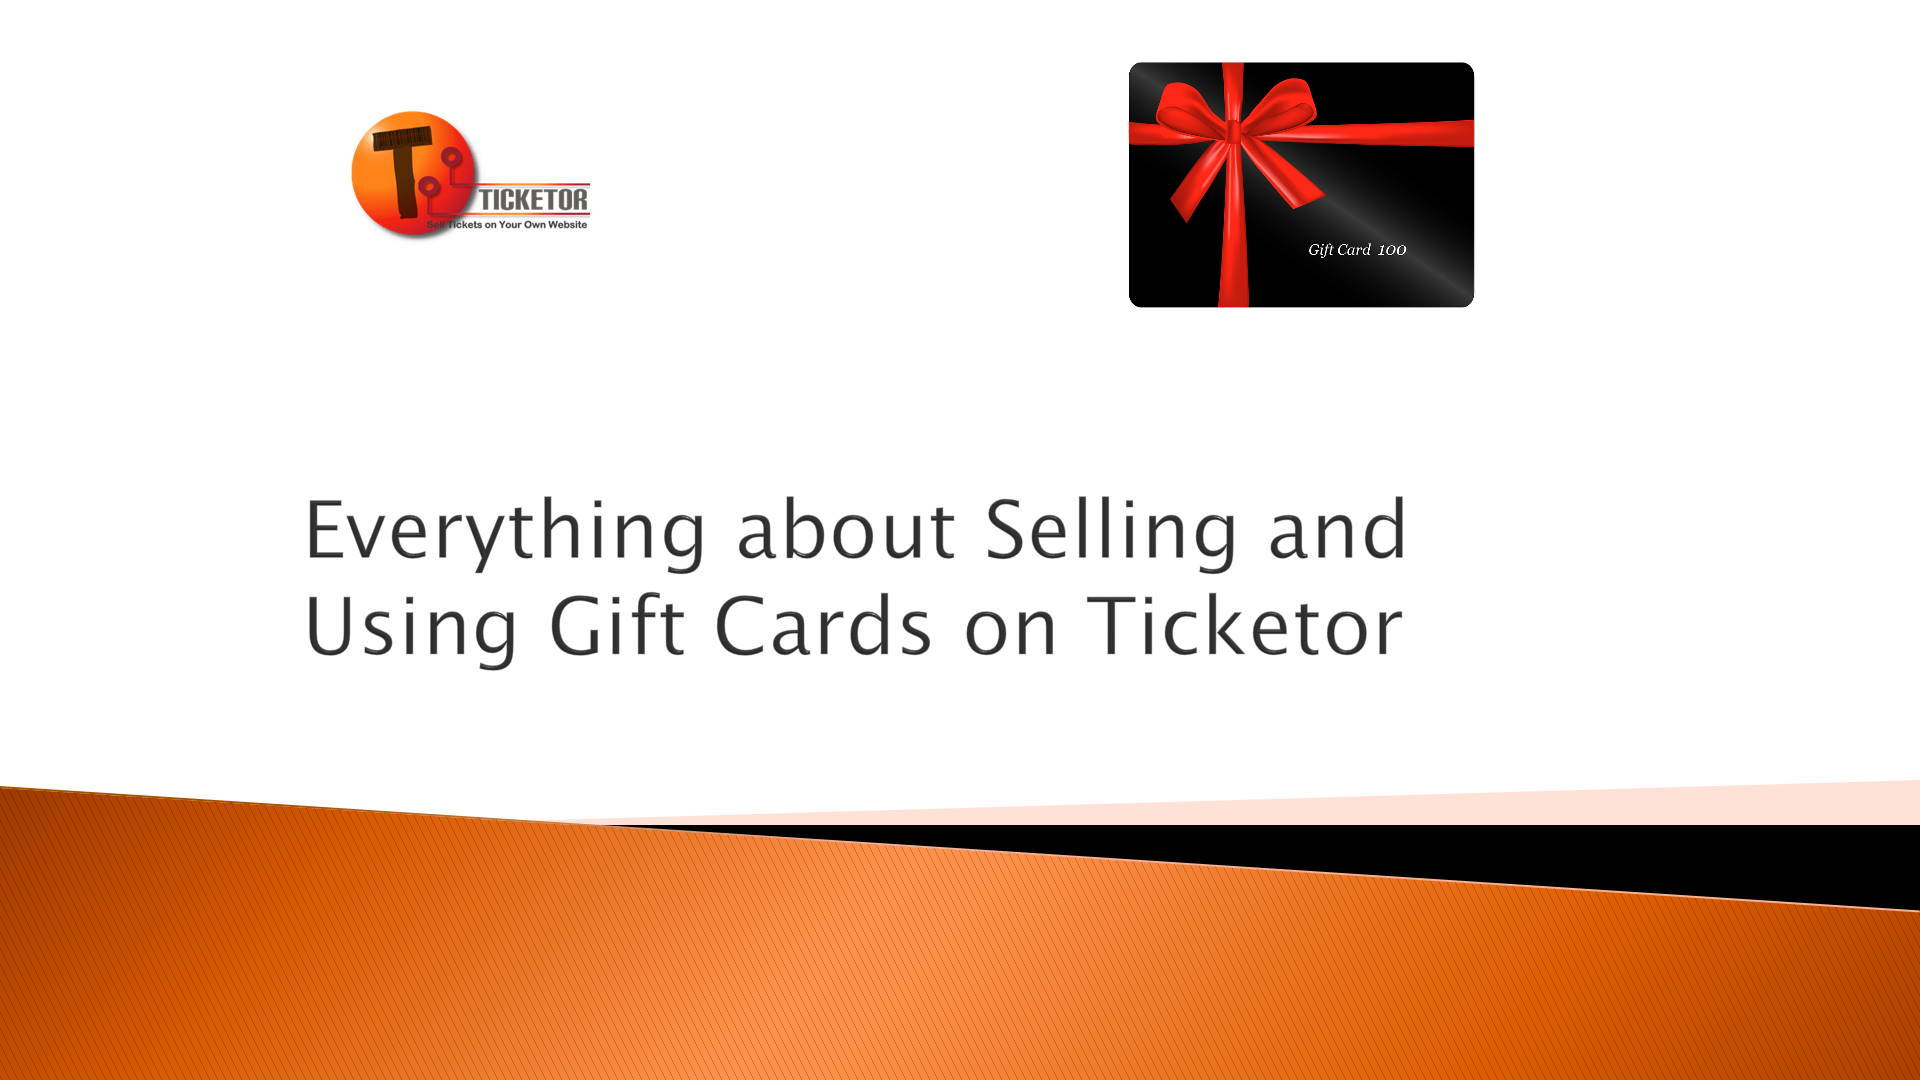 Everything About Selling and Using Gift Cards on Ticketor